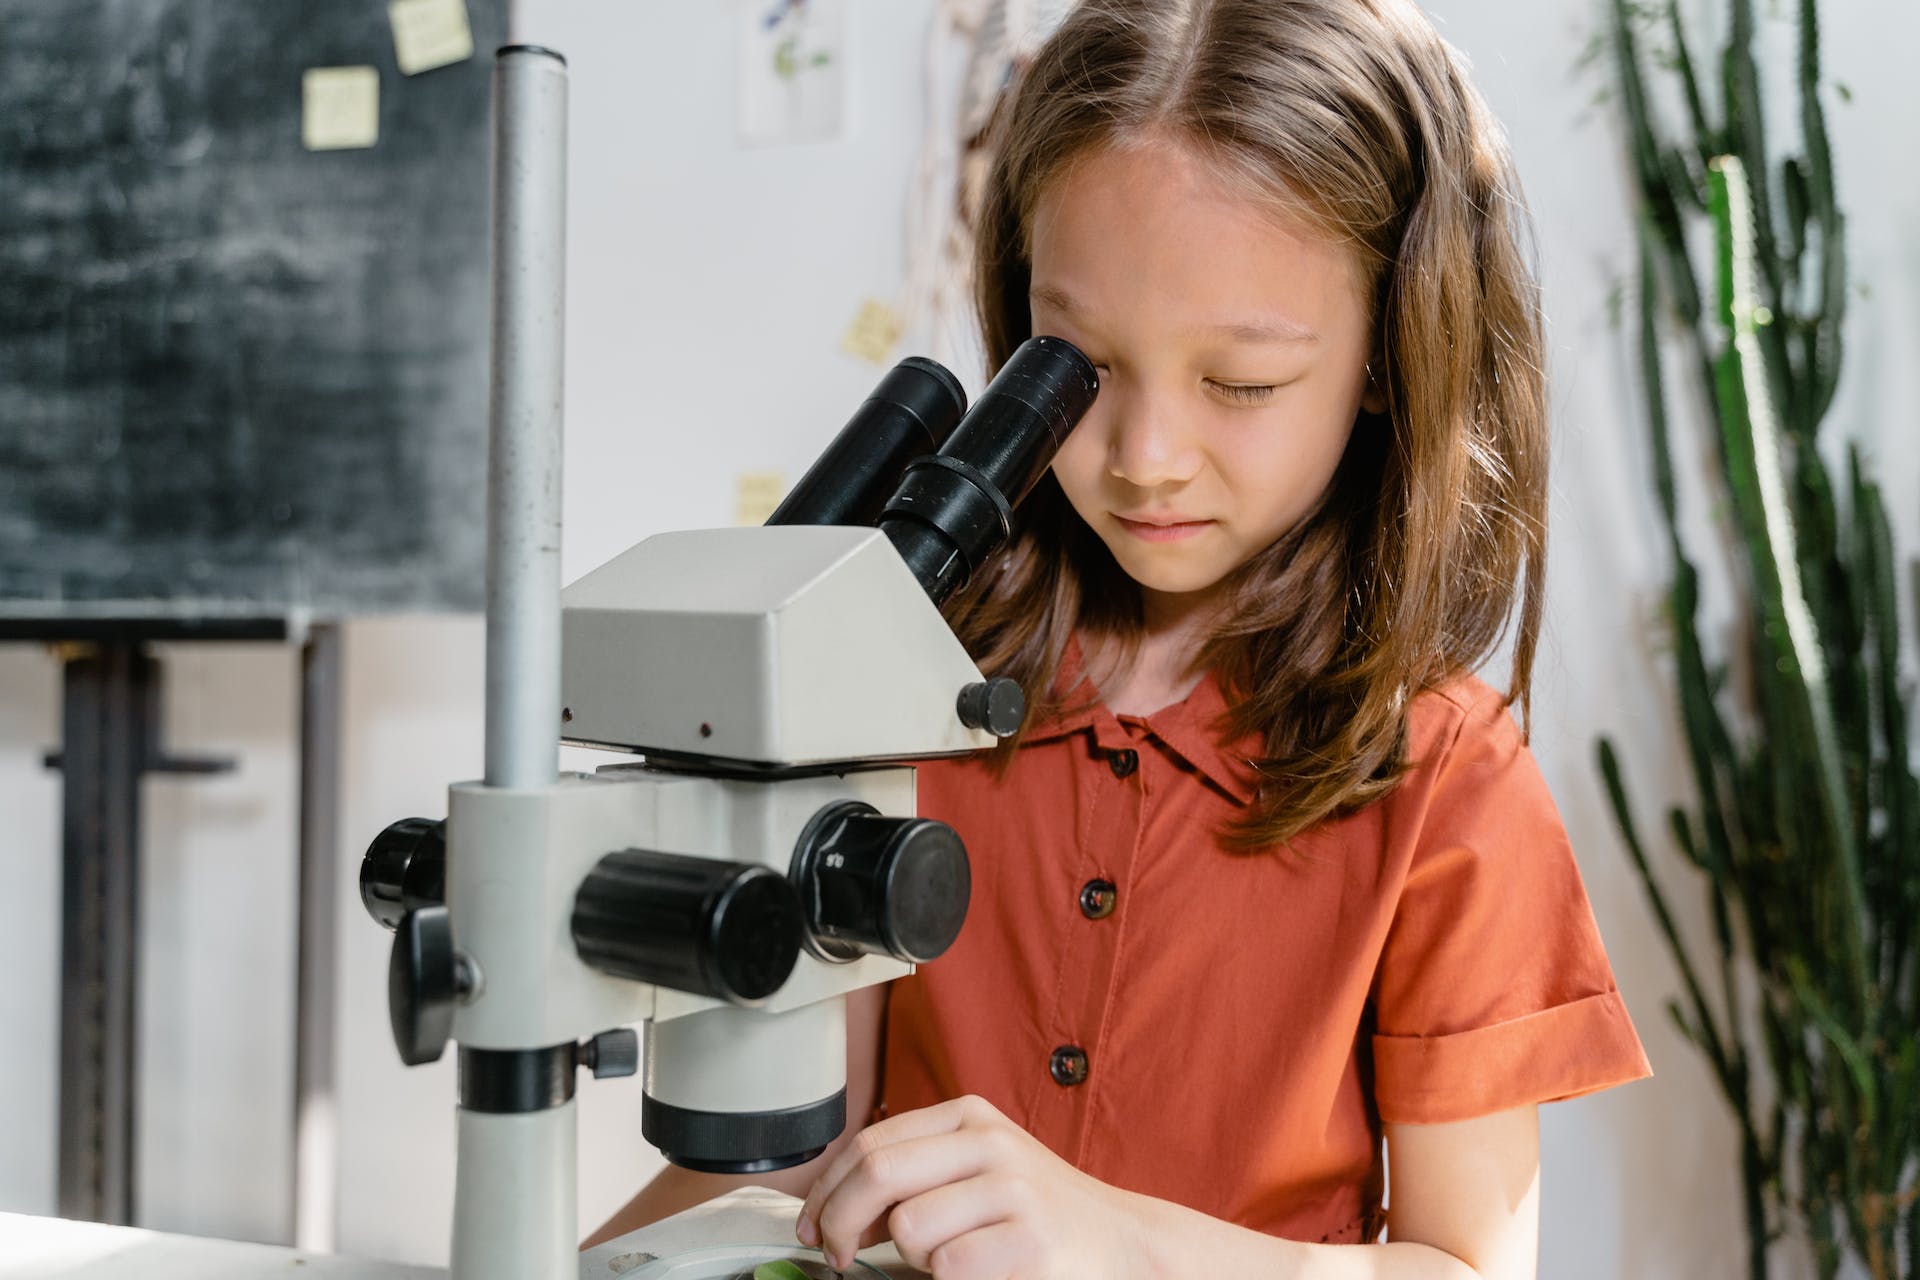 Starting young: Acknowledging the Growing Interest in Science for Kids 